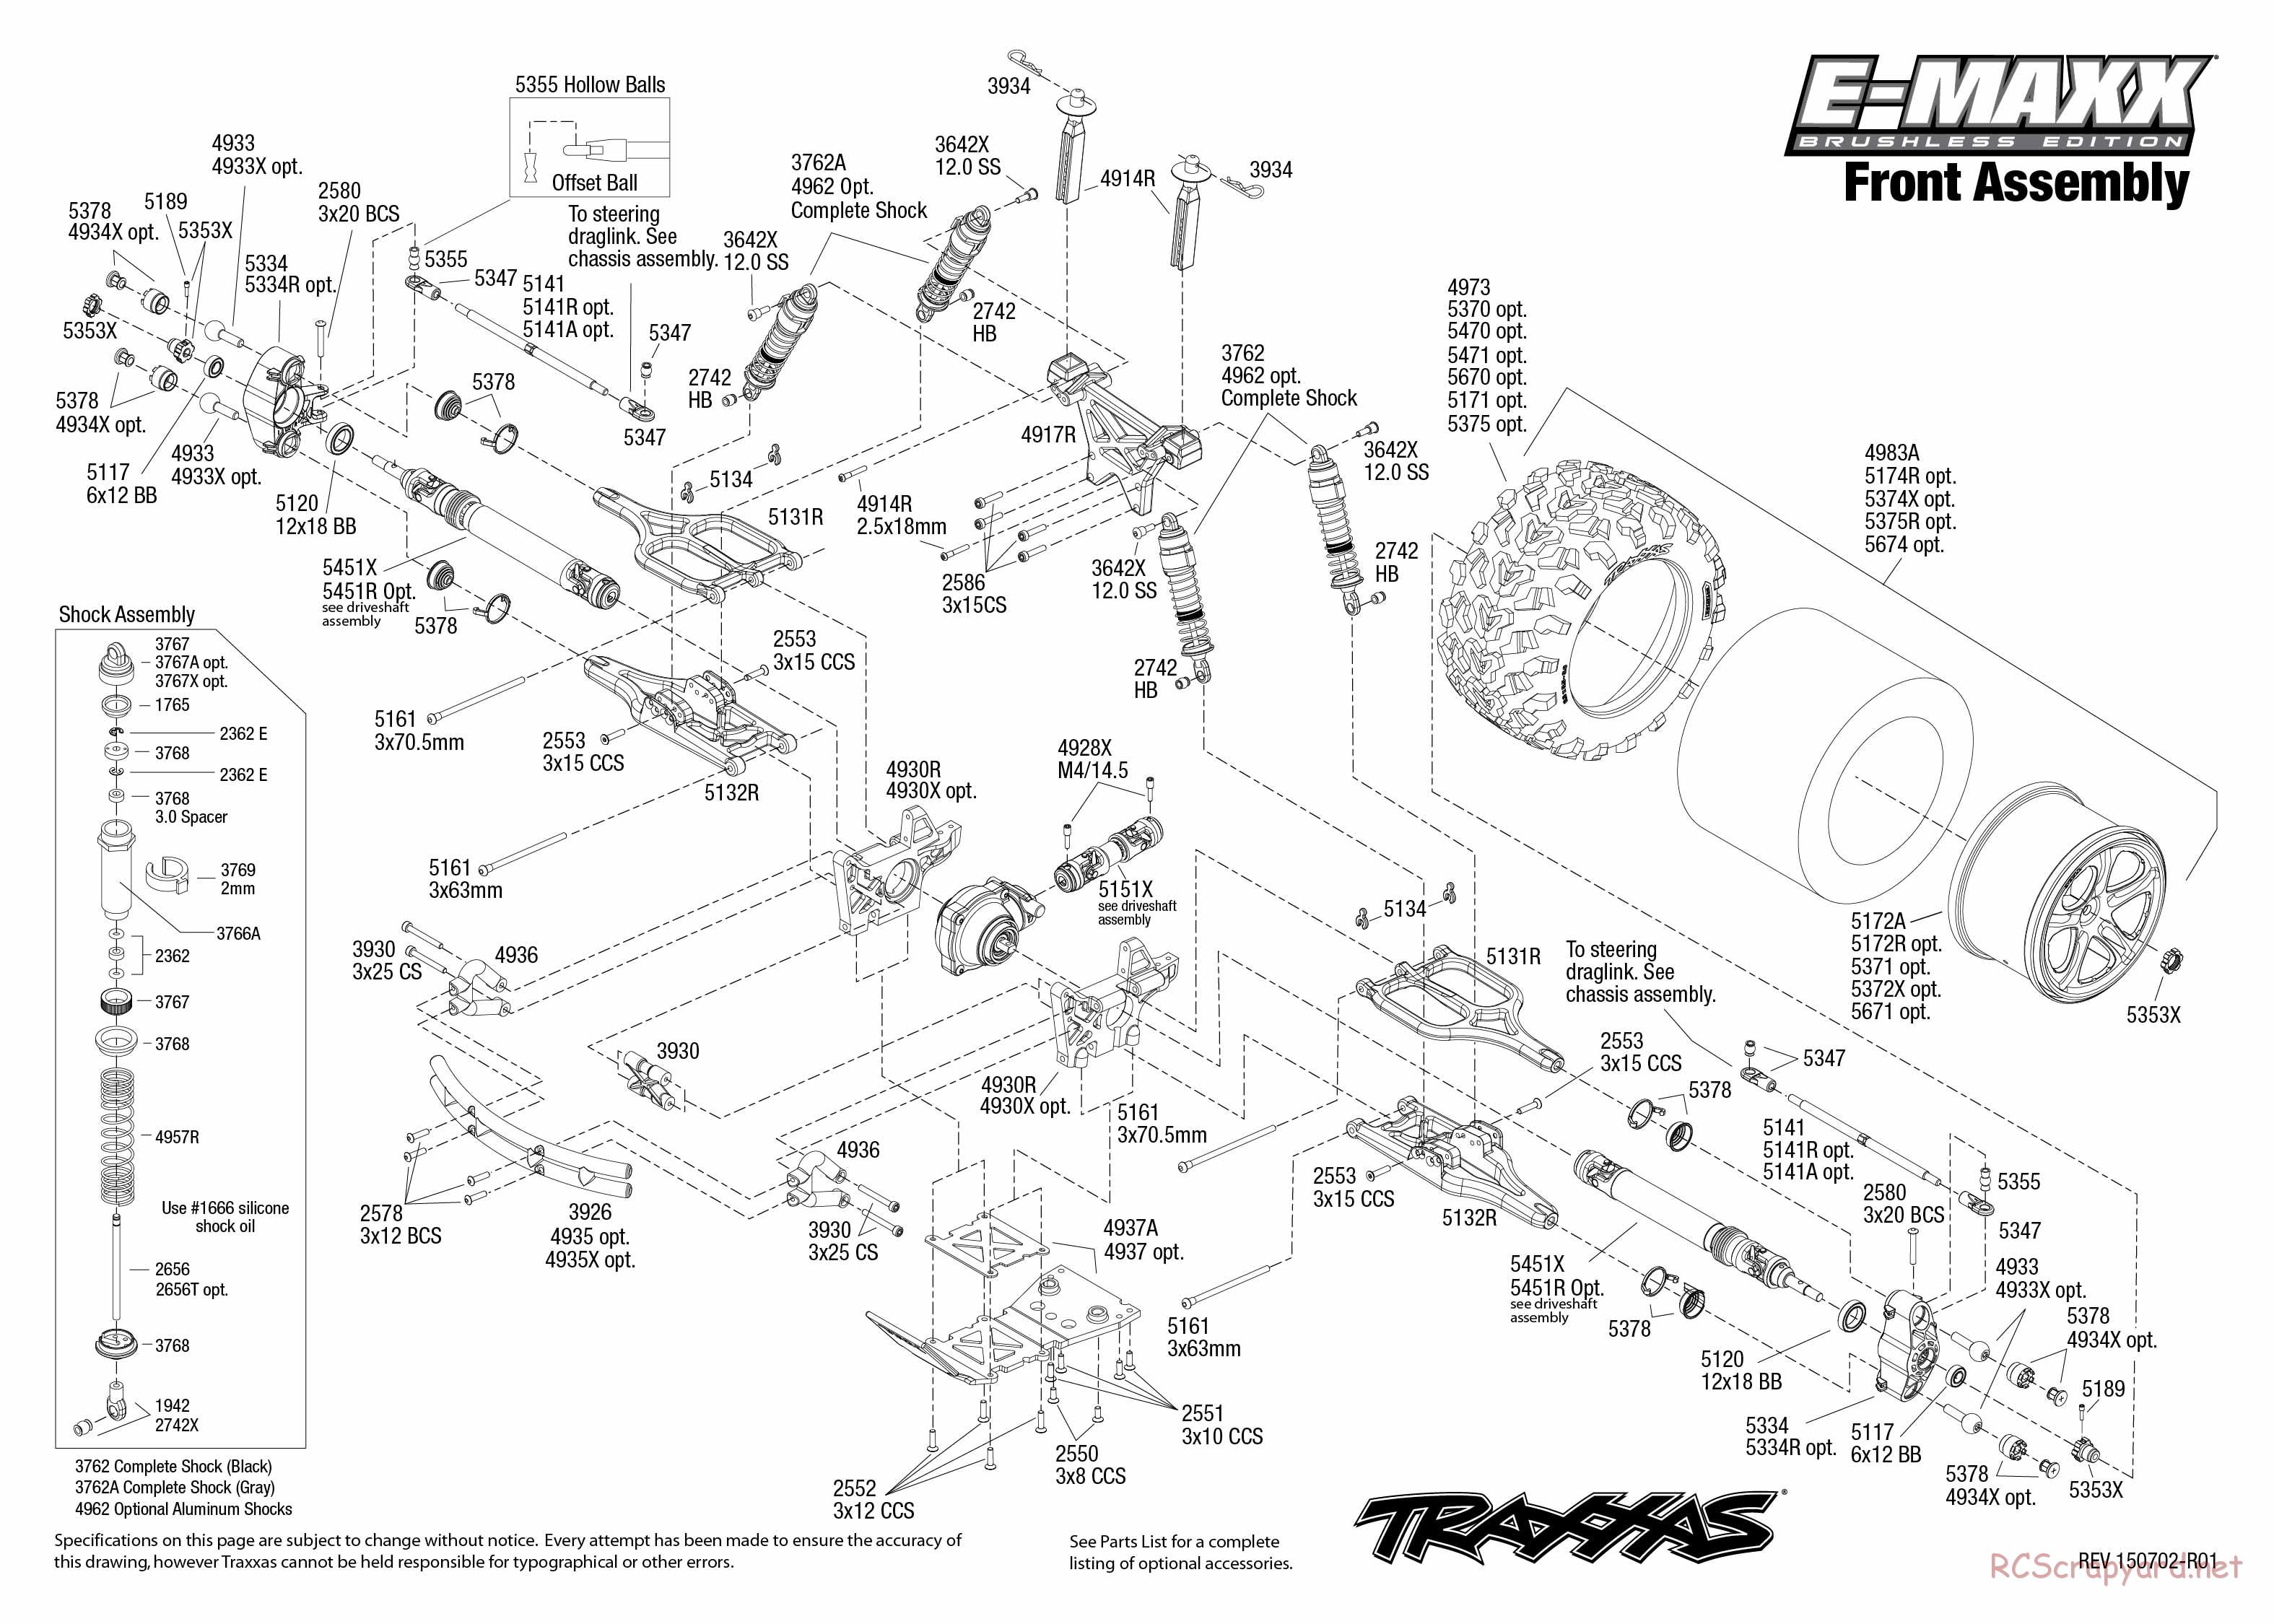 Traxxas - E-Maxx Brushless (2015) - Exploded Views - Page 2